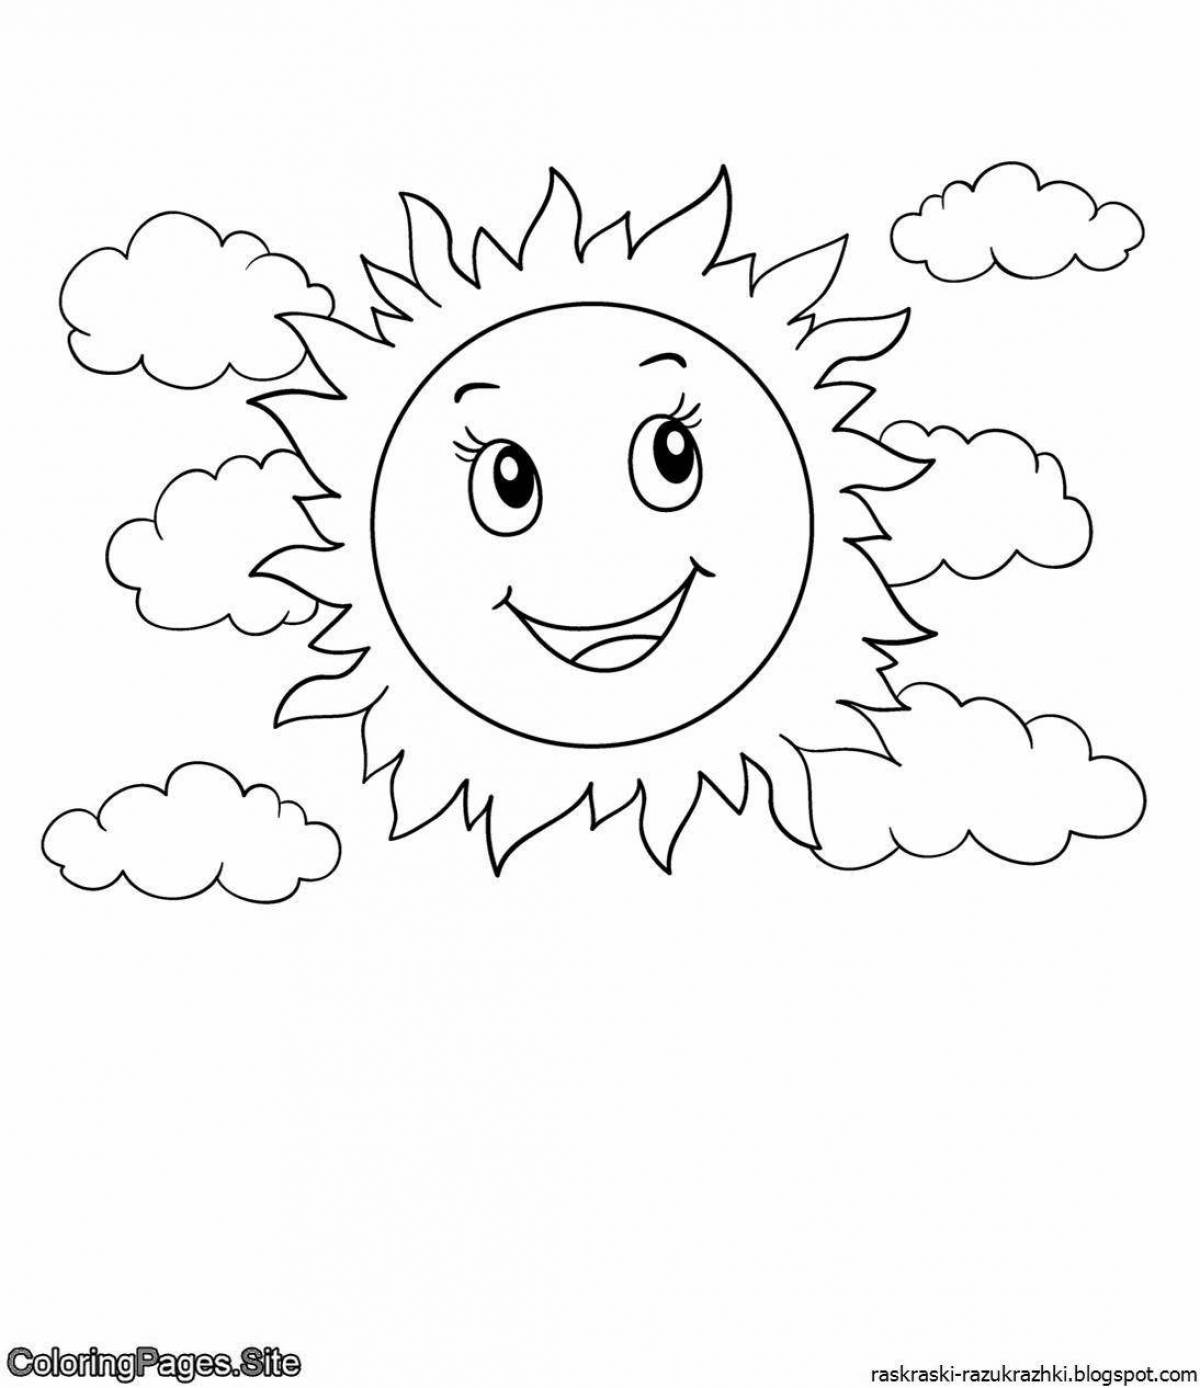 Charming sun coloring book for 4-5 year olds